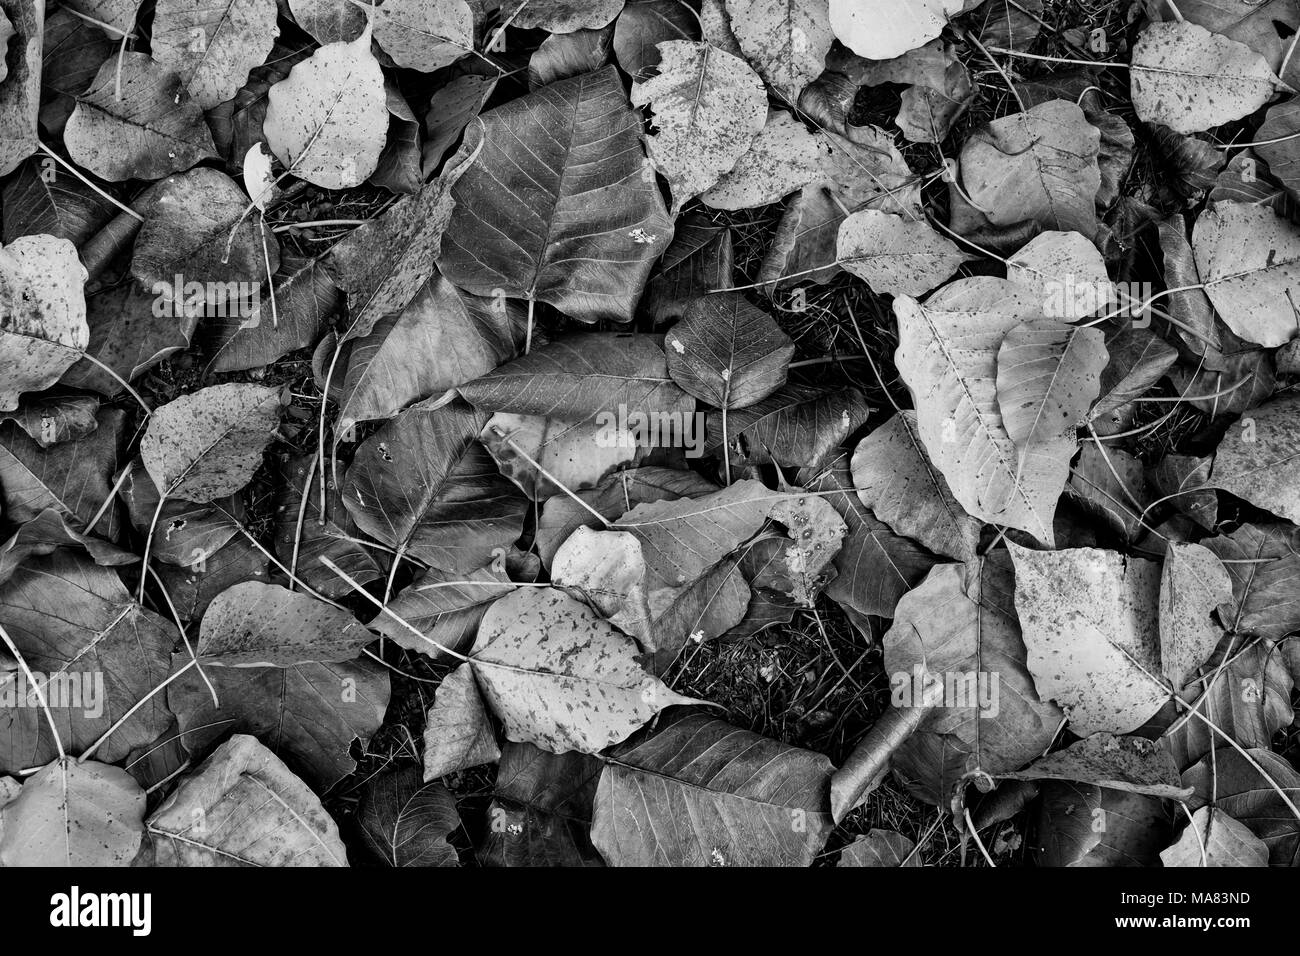 Pile of leaves Black and White Stock Photos & Images - Alamy